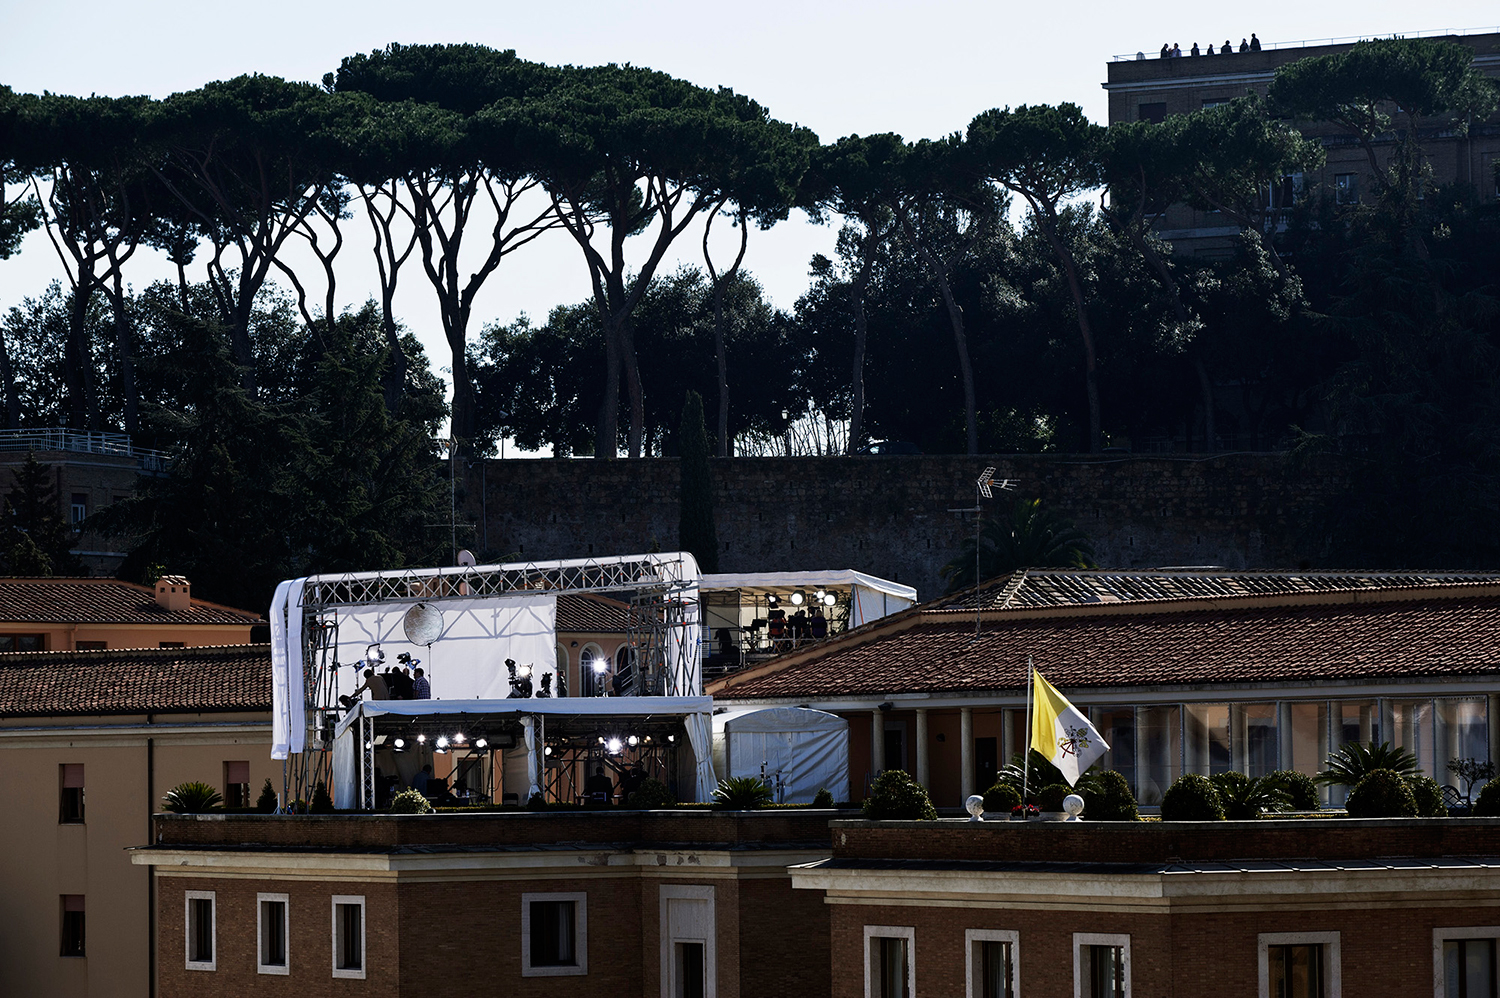 TV Locations on roof tops as seen from the top of the colonnades of St Peter's Square.